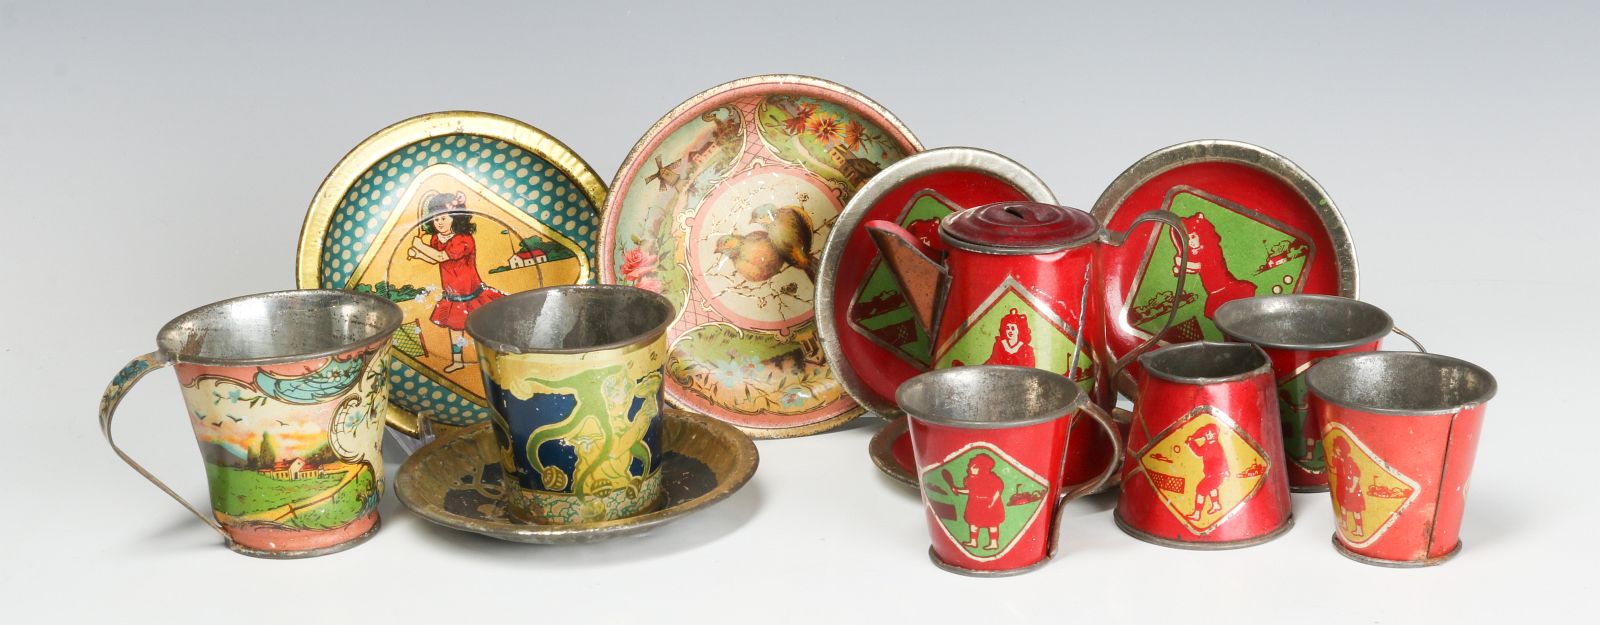 A COLLECTION OF ANTIQUE TIN LITHO TOY DISHES